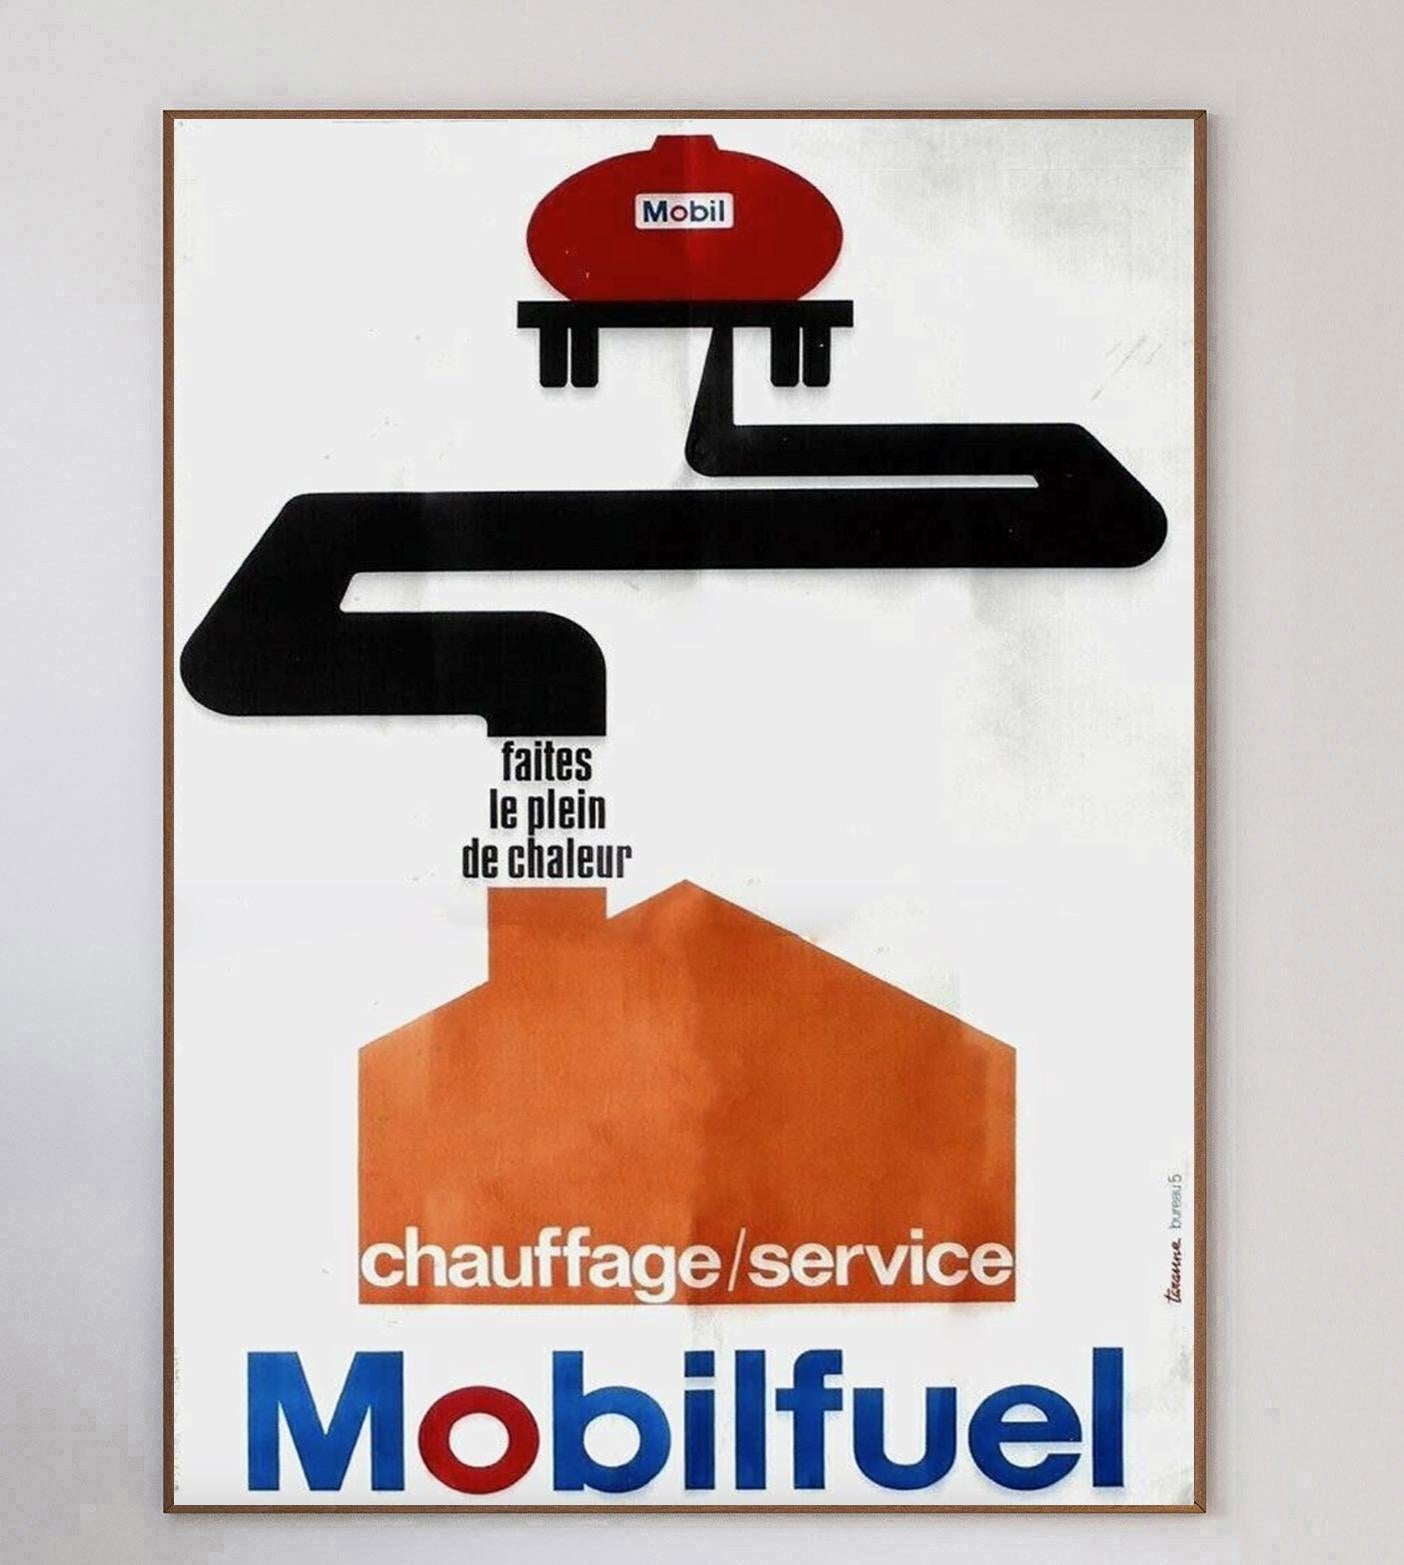 Beautiful midcentury design by Taranne for Mobilfuel depicting a large oil tanker fuelling a home with heating and services. Mobil was founded in 1911 following the ruling to split John D. Rockerfeller's Standard Oil up in to separate entities and